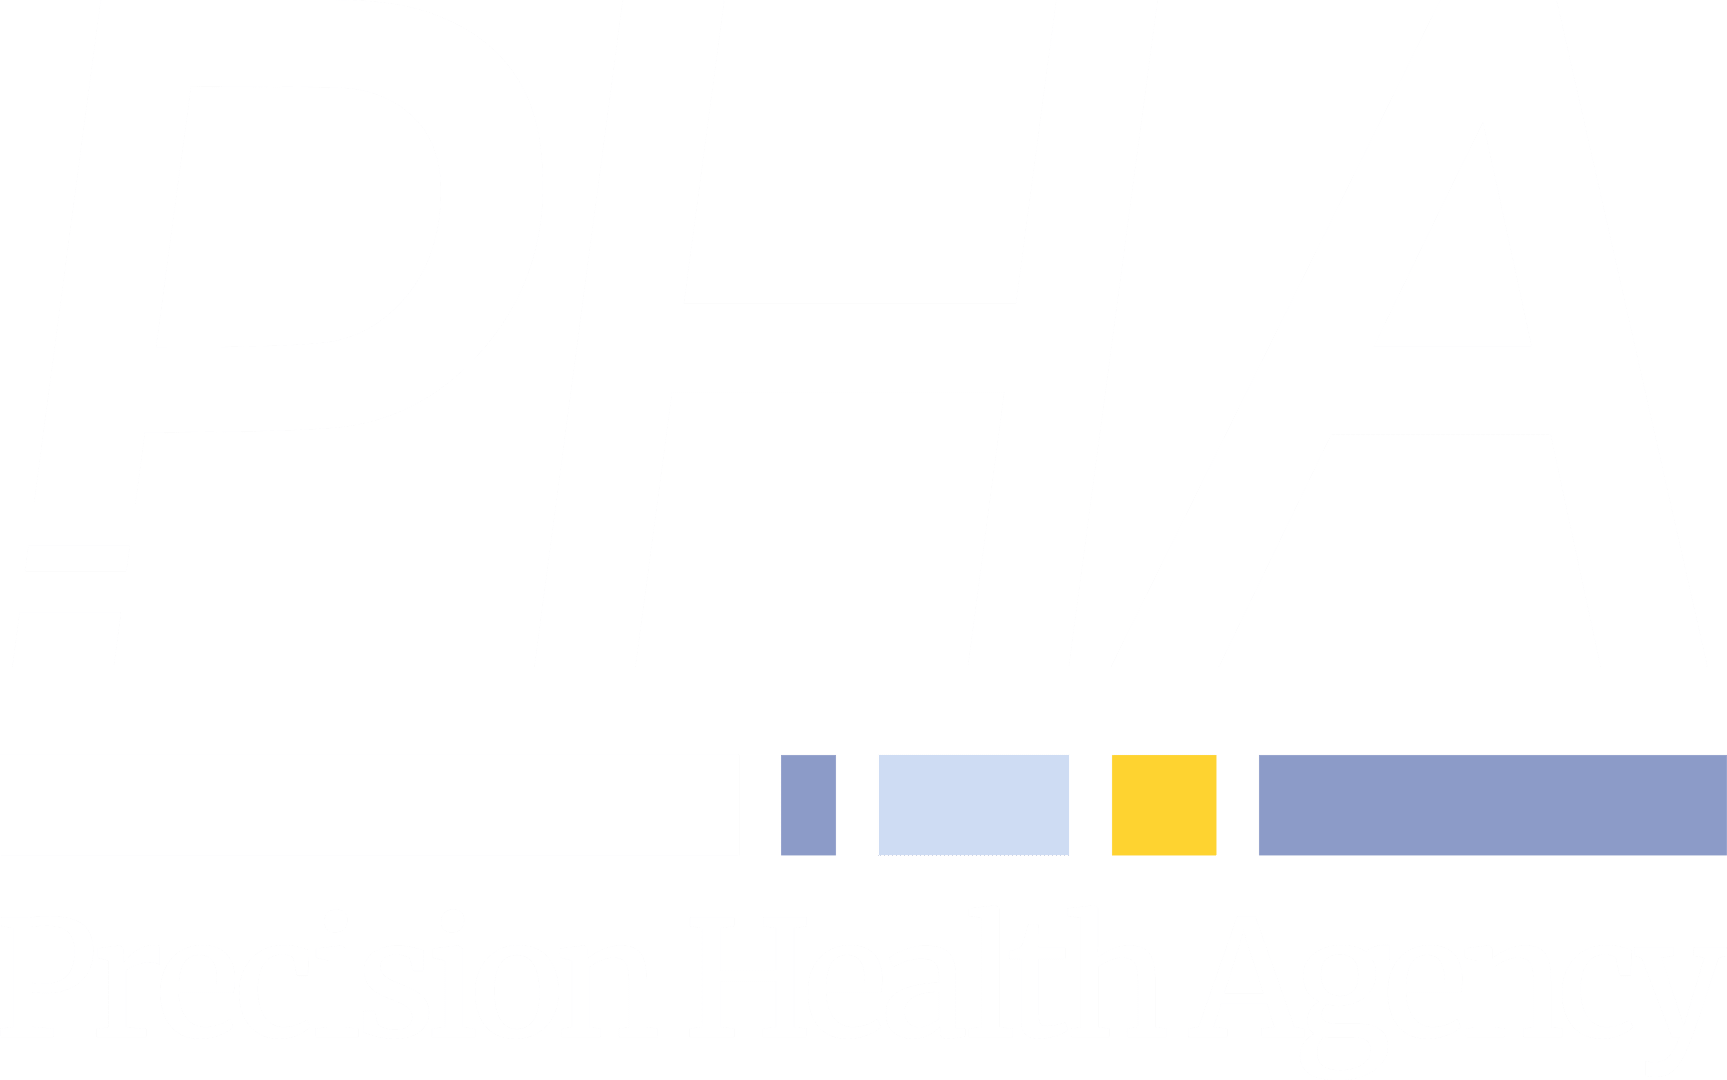 A green and white logo for the physician health agency.